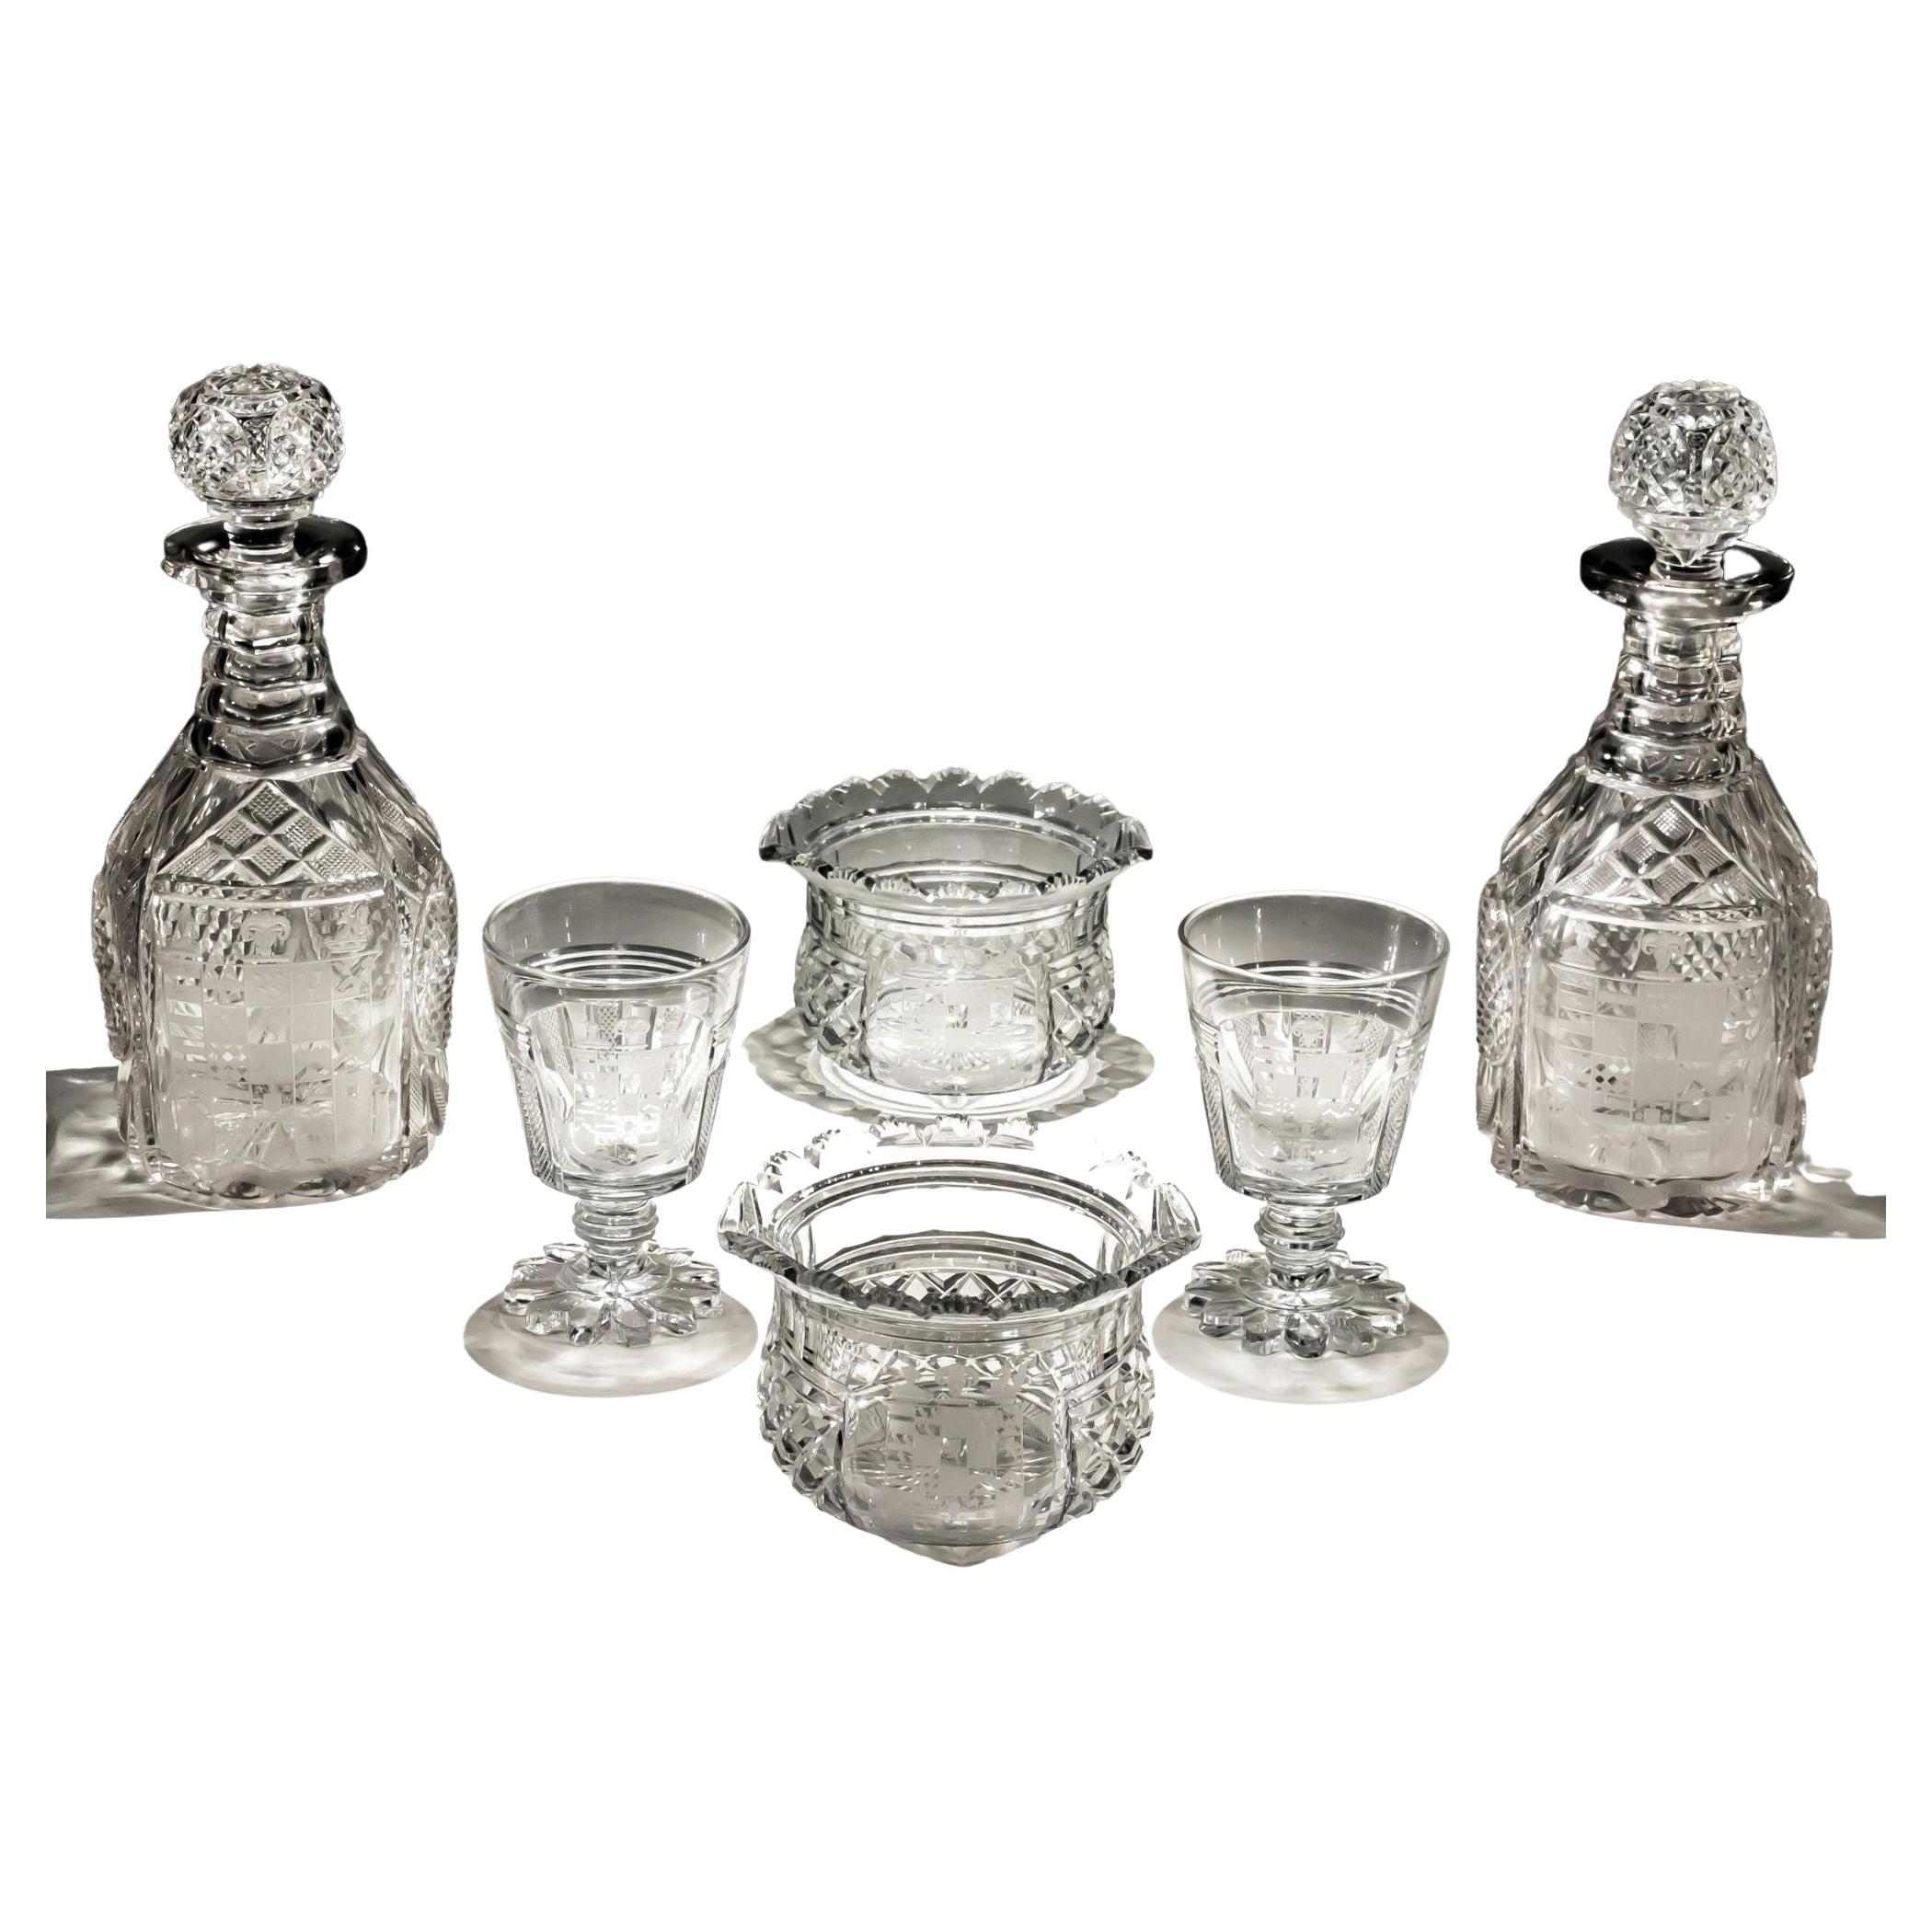 A Elaborate Suite Of Regency Period Cut Glass From The Lambton Service